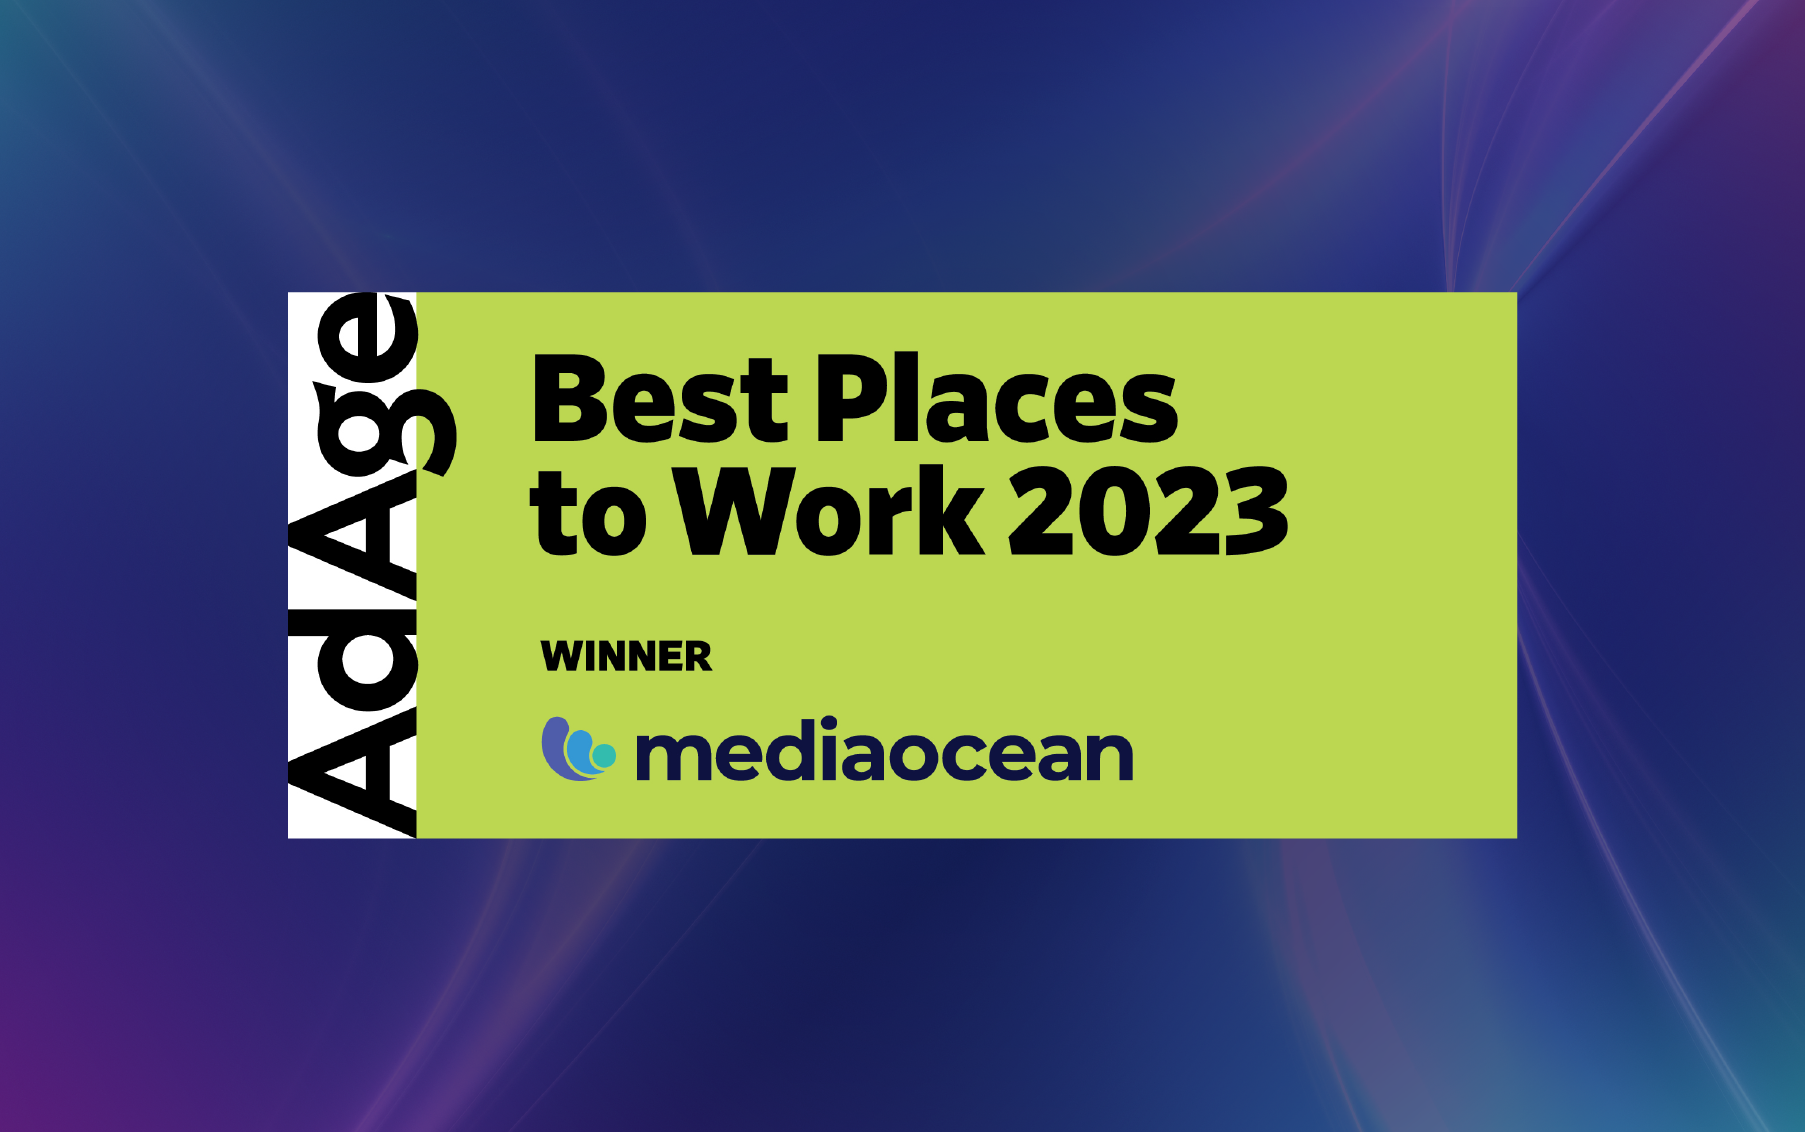 Mediaocean Recognized as One of Top Ten Ad Age Best Places to Work 2023